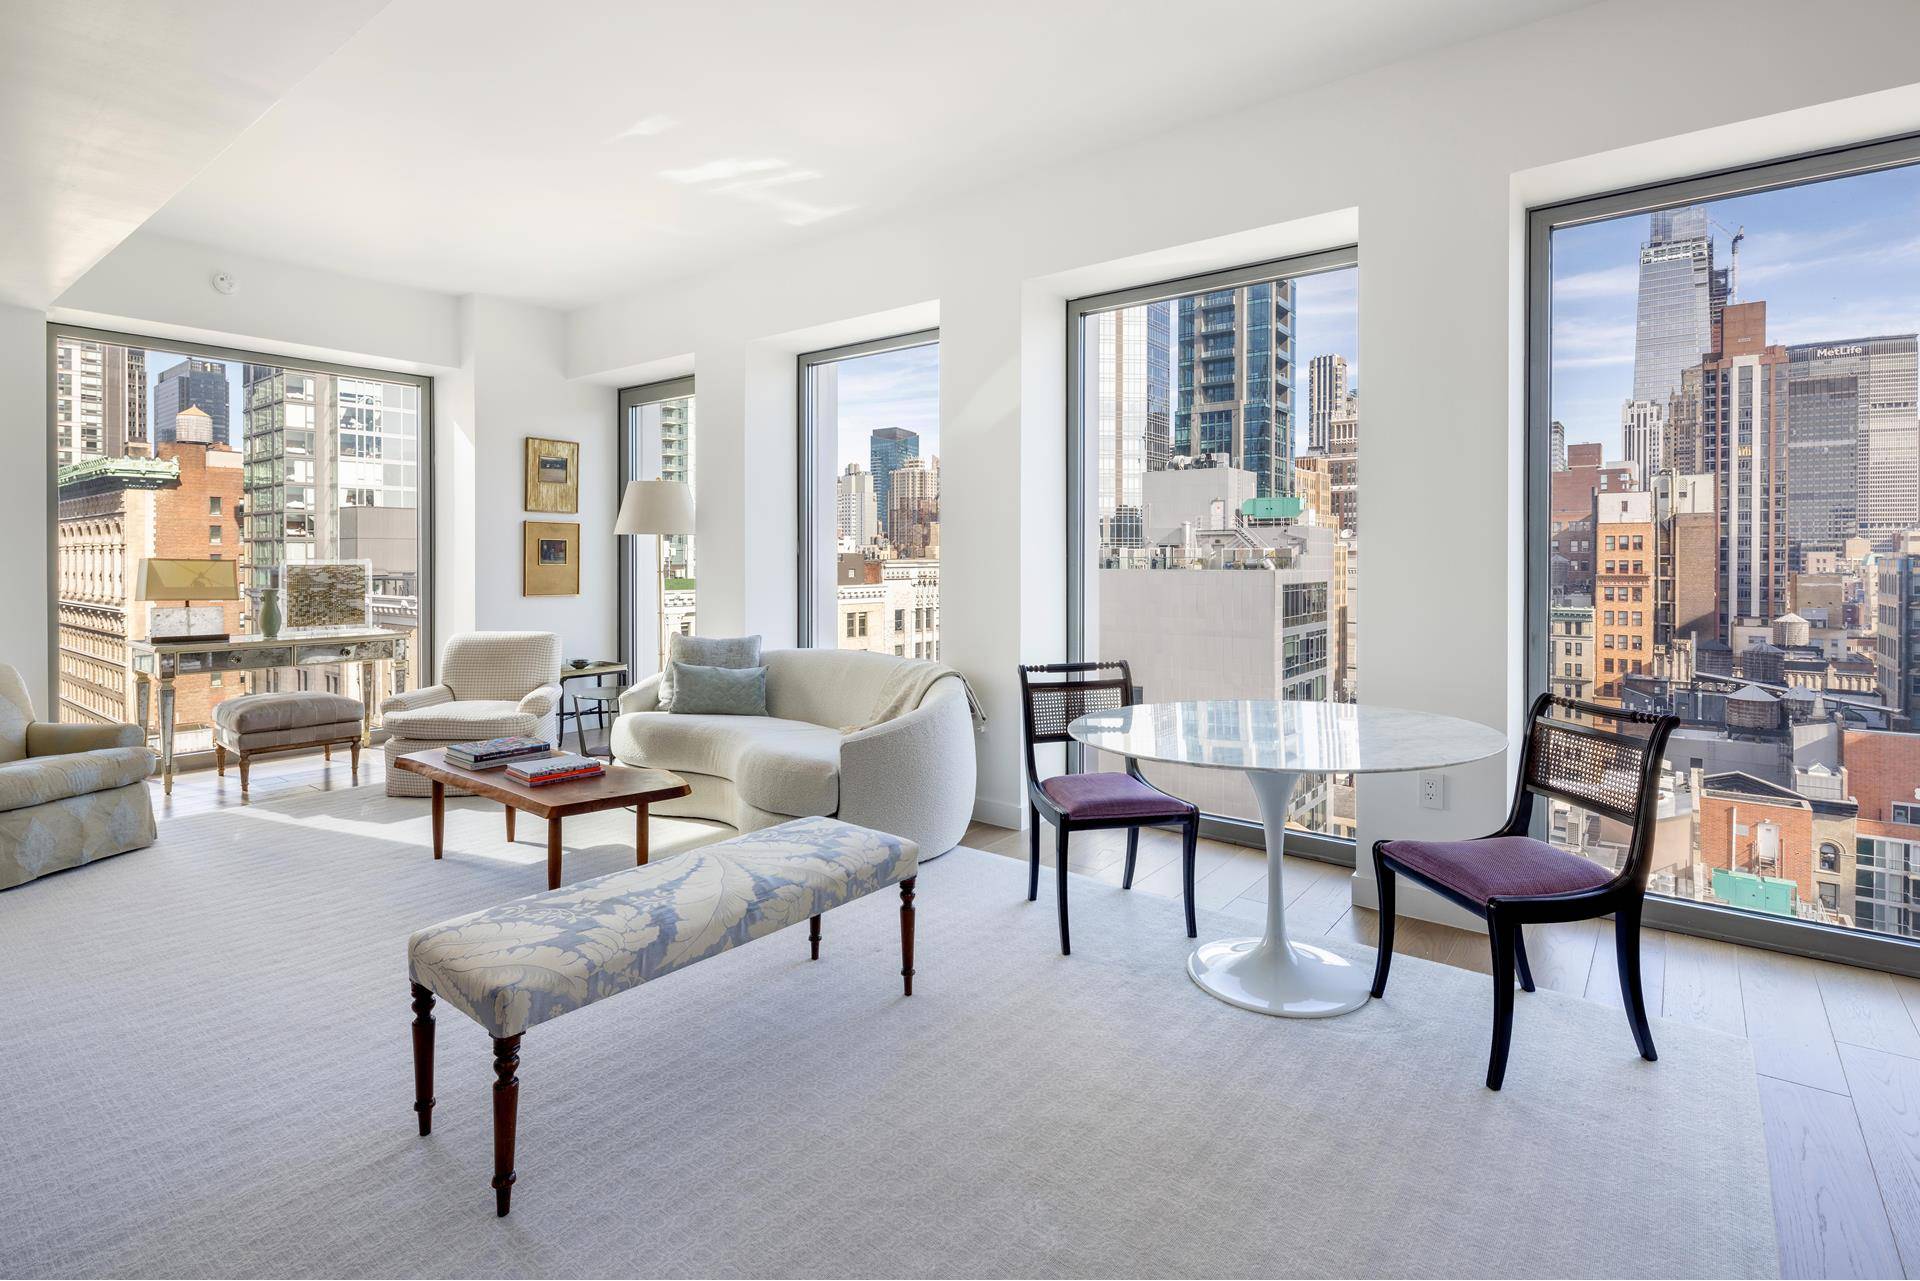 Residence 23 at 30 East 31st Street is a stunning, full floor condominium located in New York City's NoMad district.